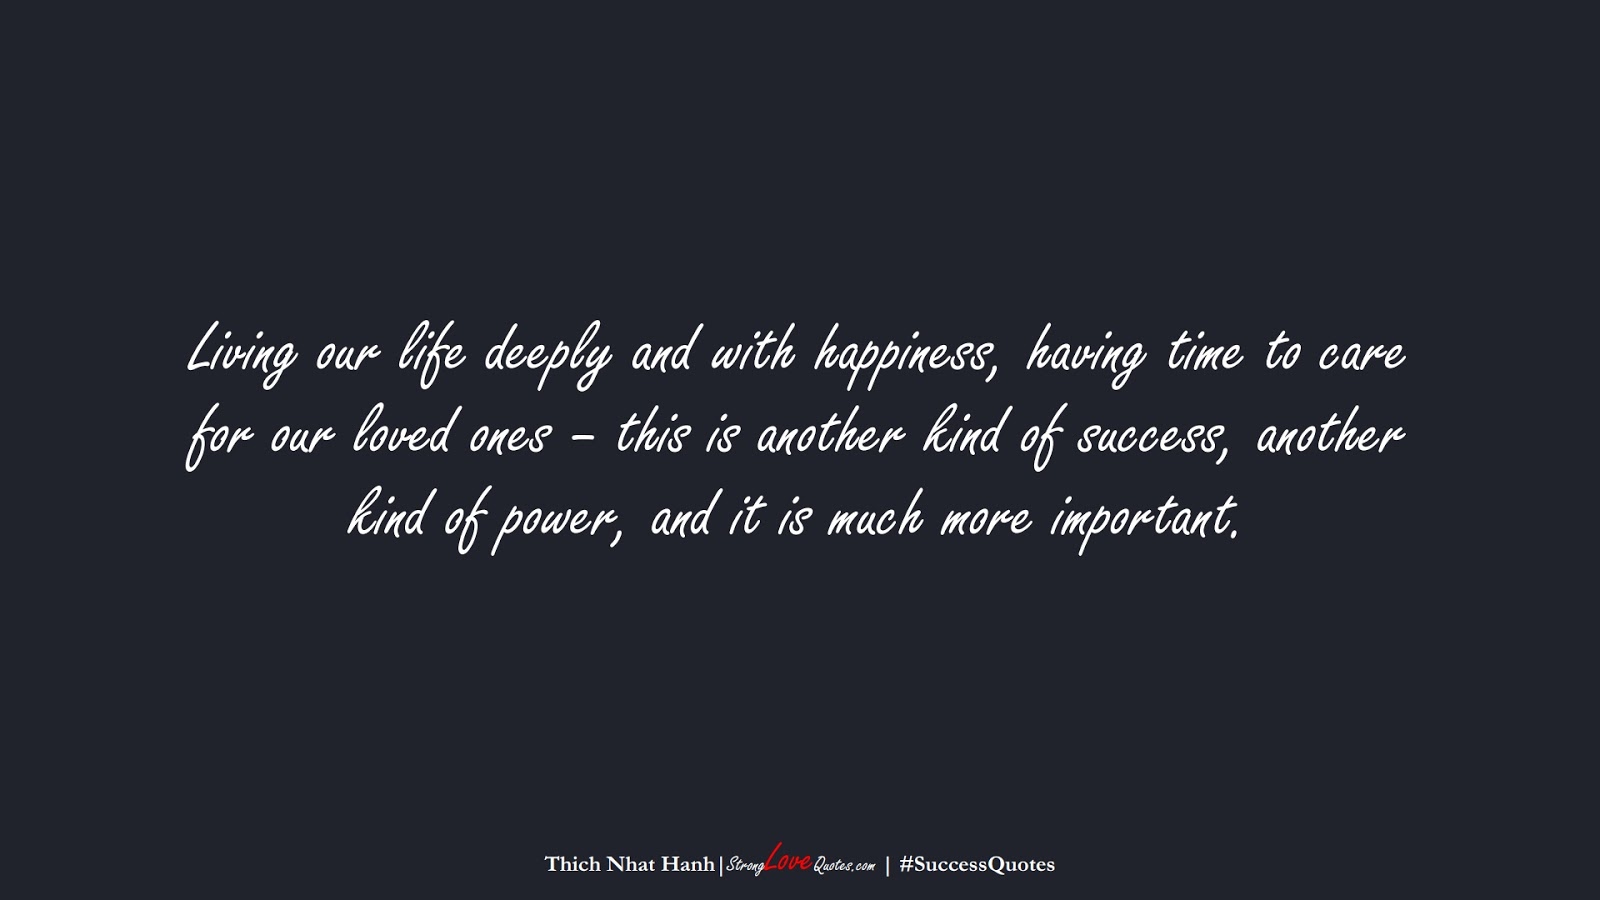 Living our life deeply and with happiness, having time to care for our loved ones – this is another kind of success, another kind of power, and it is much more important. (Thich Nhat Hanh);  #SuccessQuotes